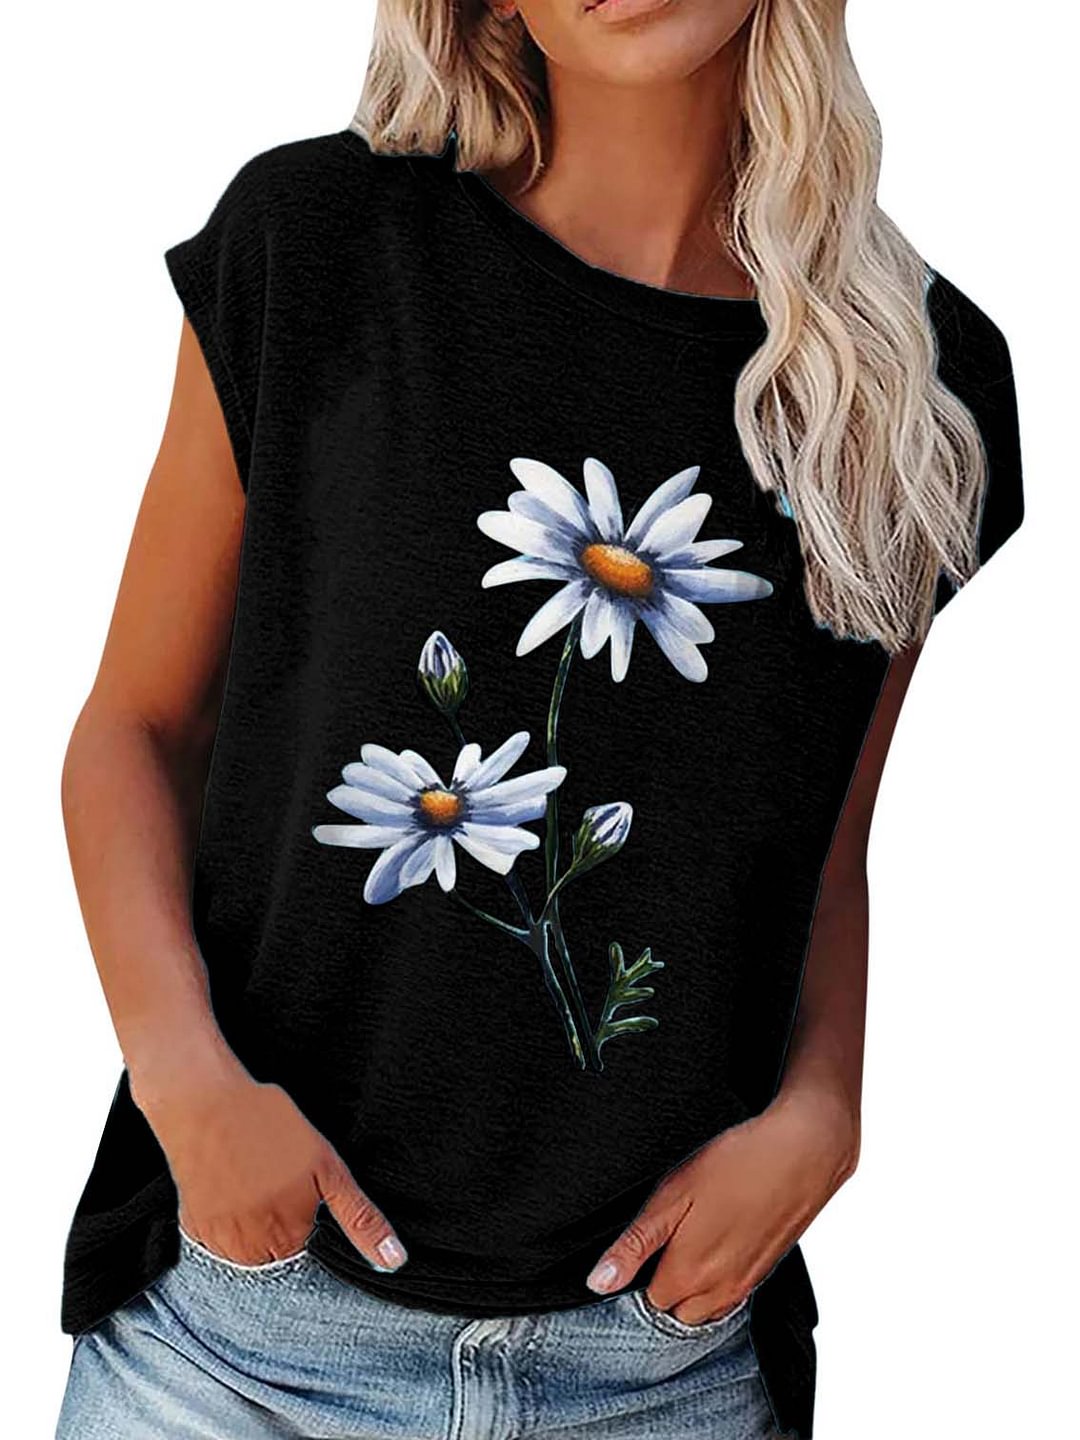 Women's Short Sleeve Scoop Neck Floral Printed Tops T-shirts